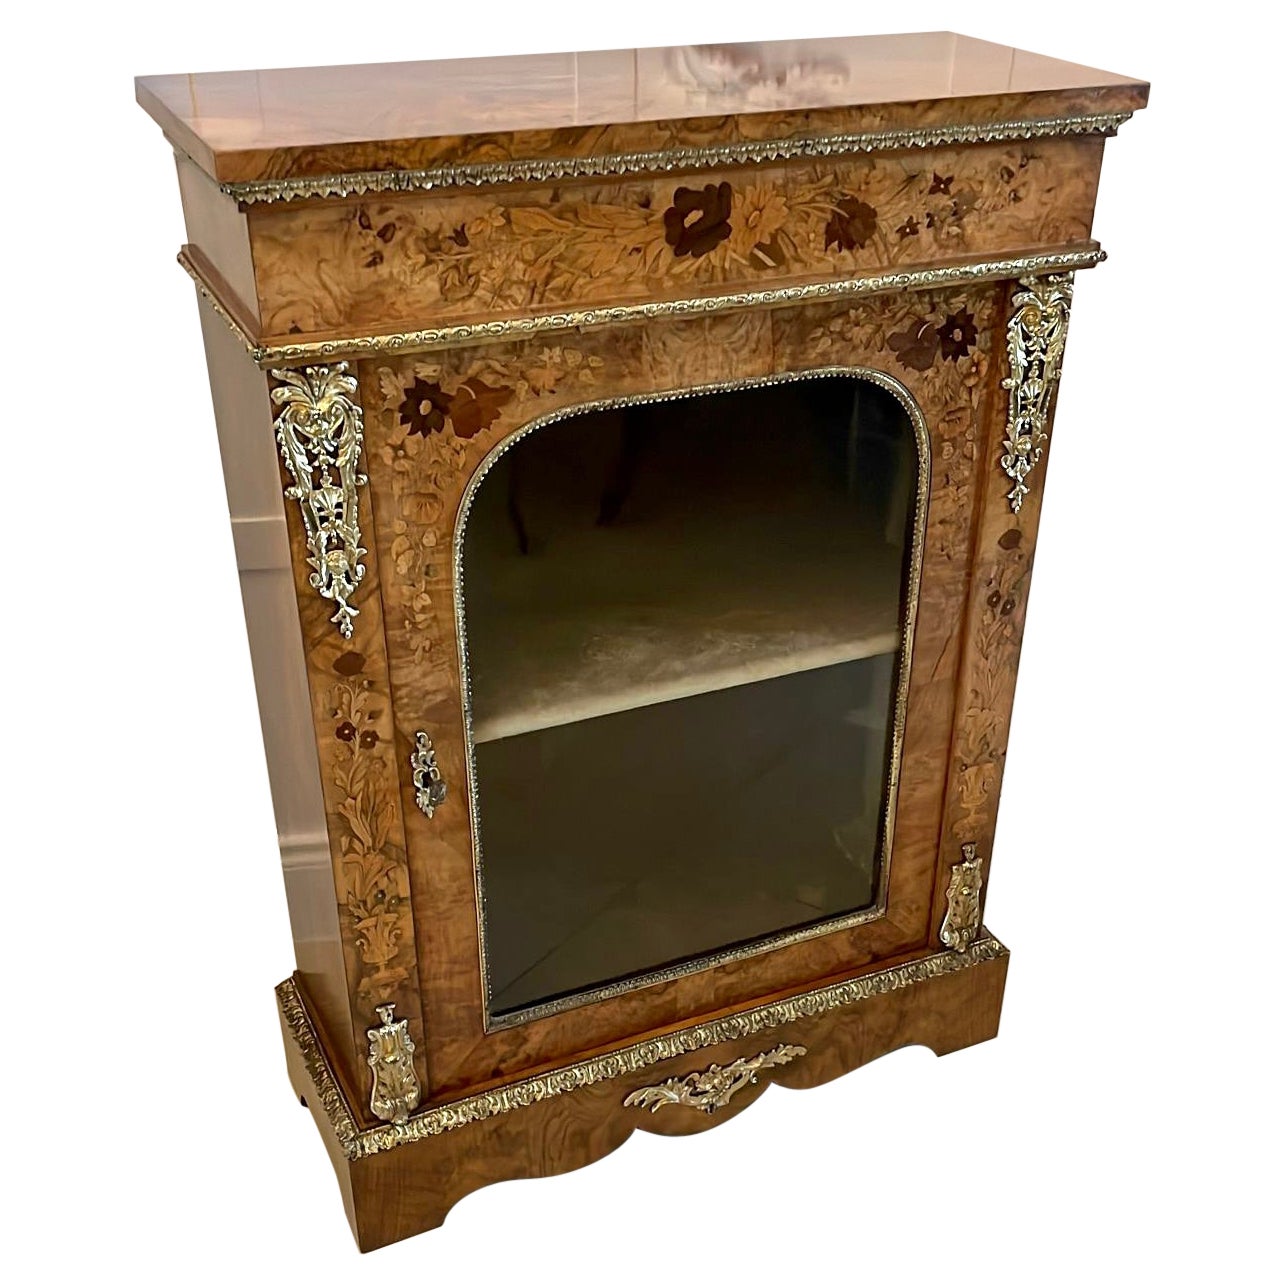 Fine Quality Antique Burr Walnut Marquetry Inlaid Ormolu Mounted Display Cabinet For Sale